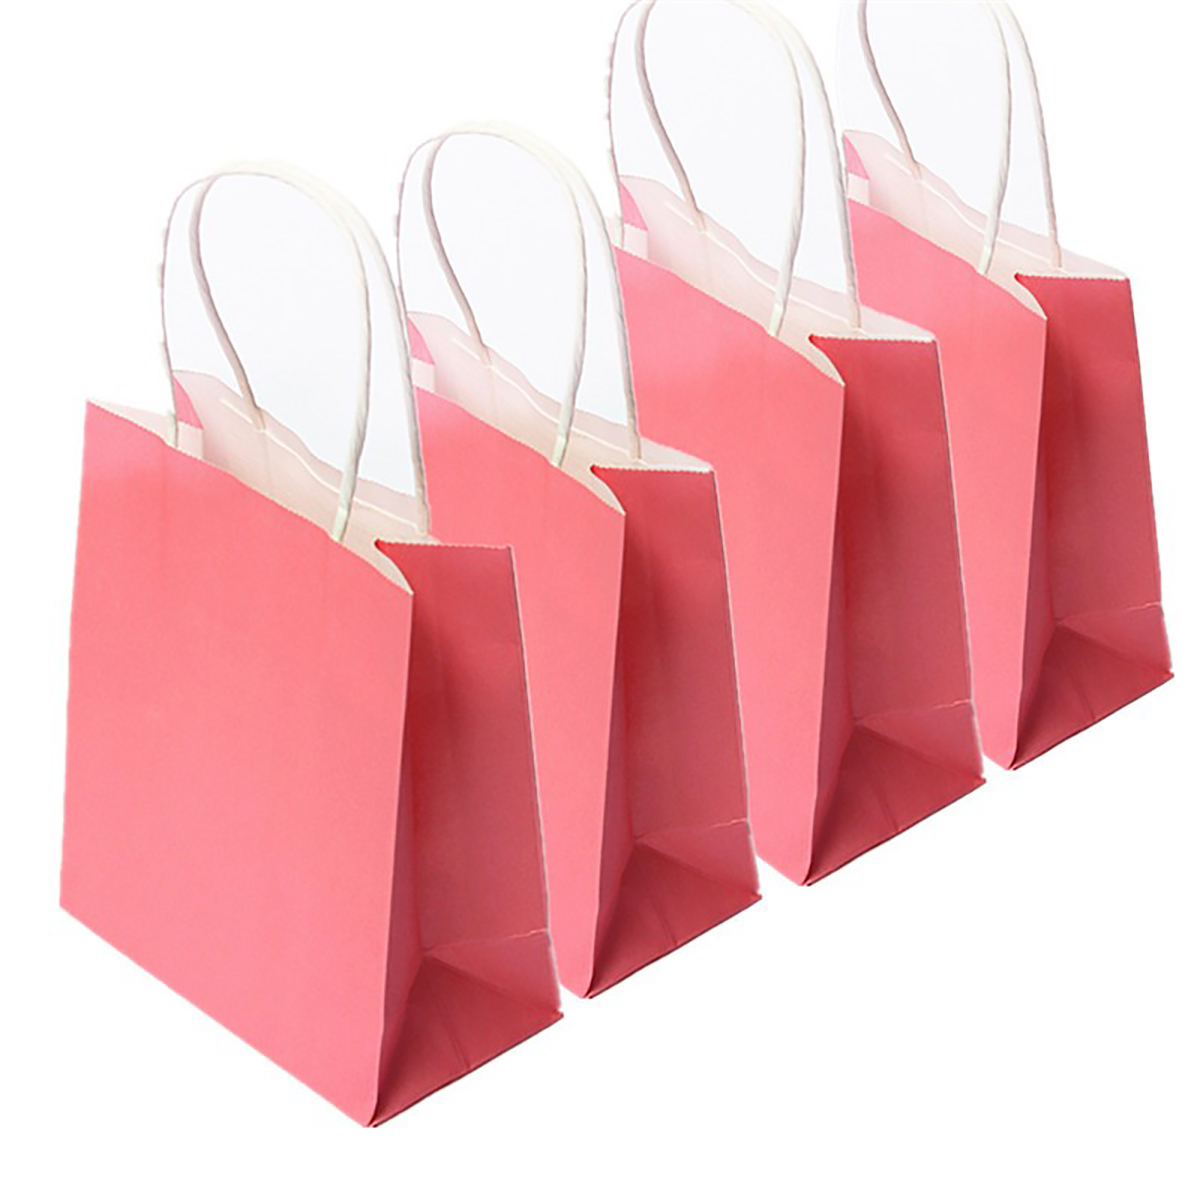 Colorful-Kraft-Paper-Gift-Bag-Wedding-Party-Handle-Paper-Gift-Bags-987091-6